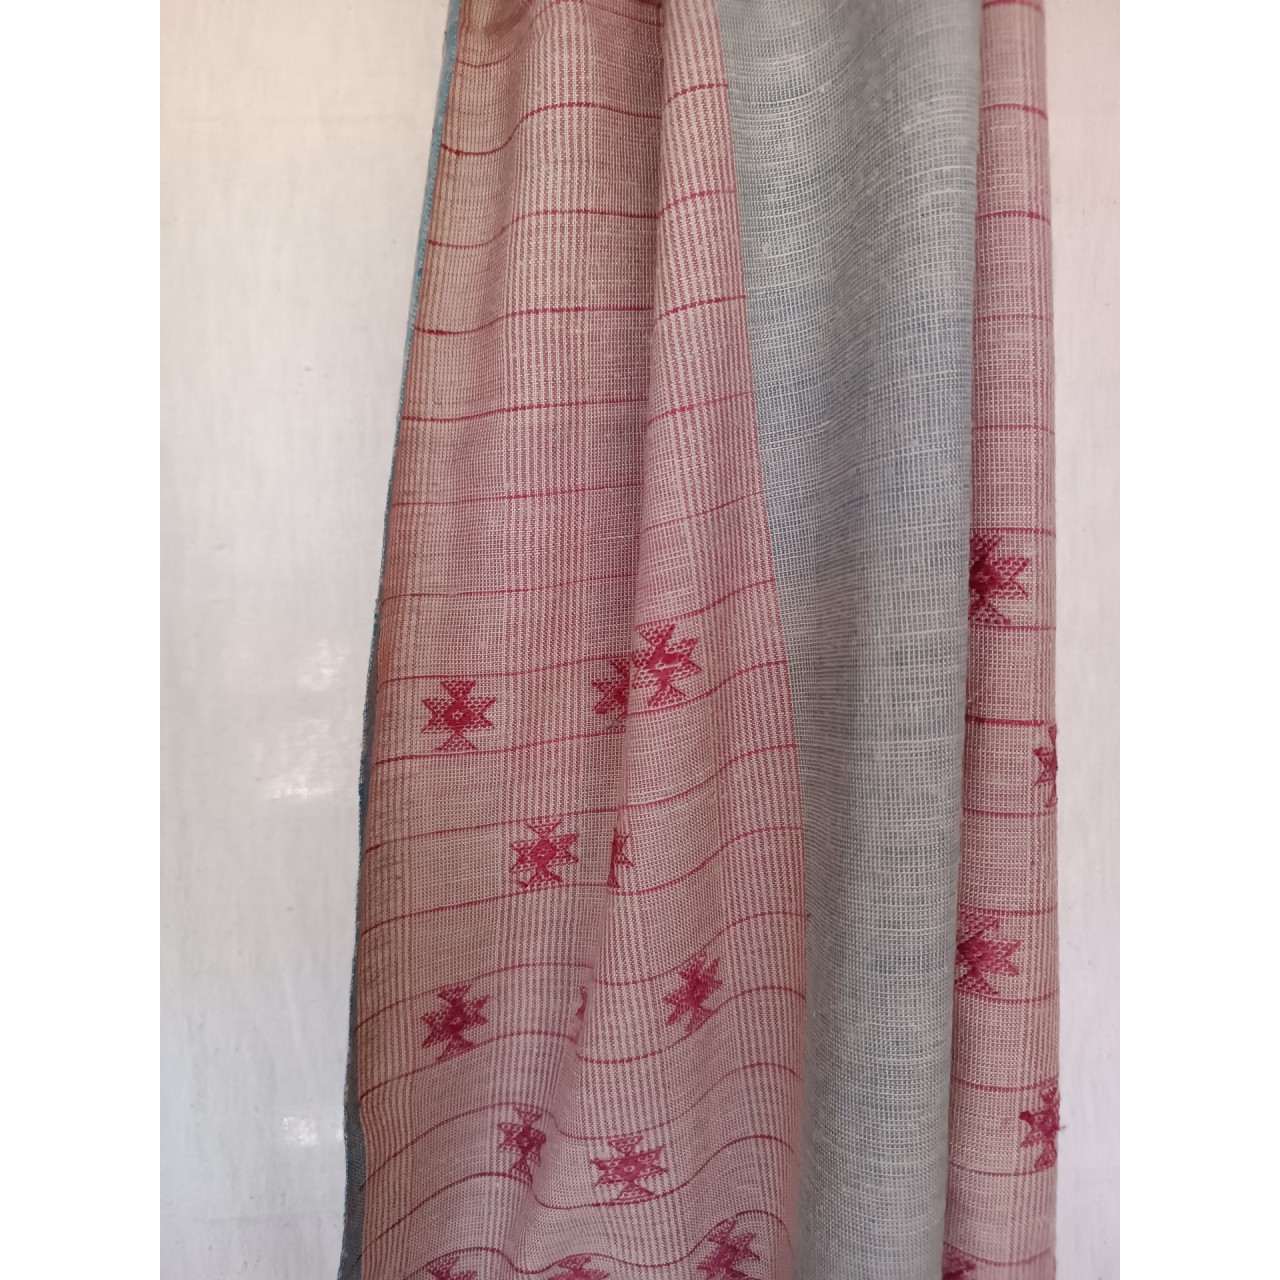 (962) Cotton and matka silk Azo-free dyed Kutchy stole from Kutch with extra-weft and motifs - Dark grey, pink, horizontal stripes, extra weft, motif